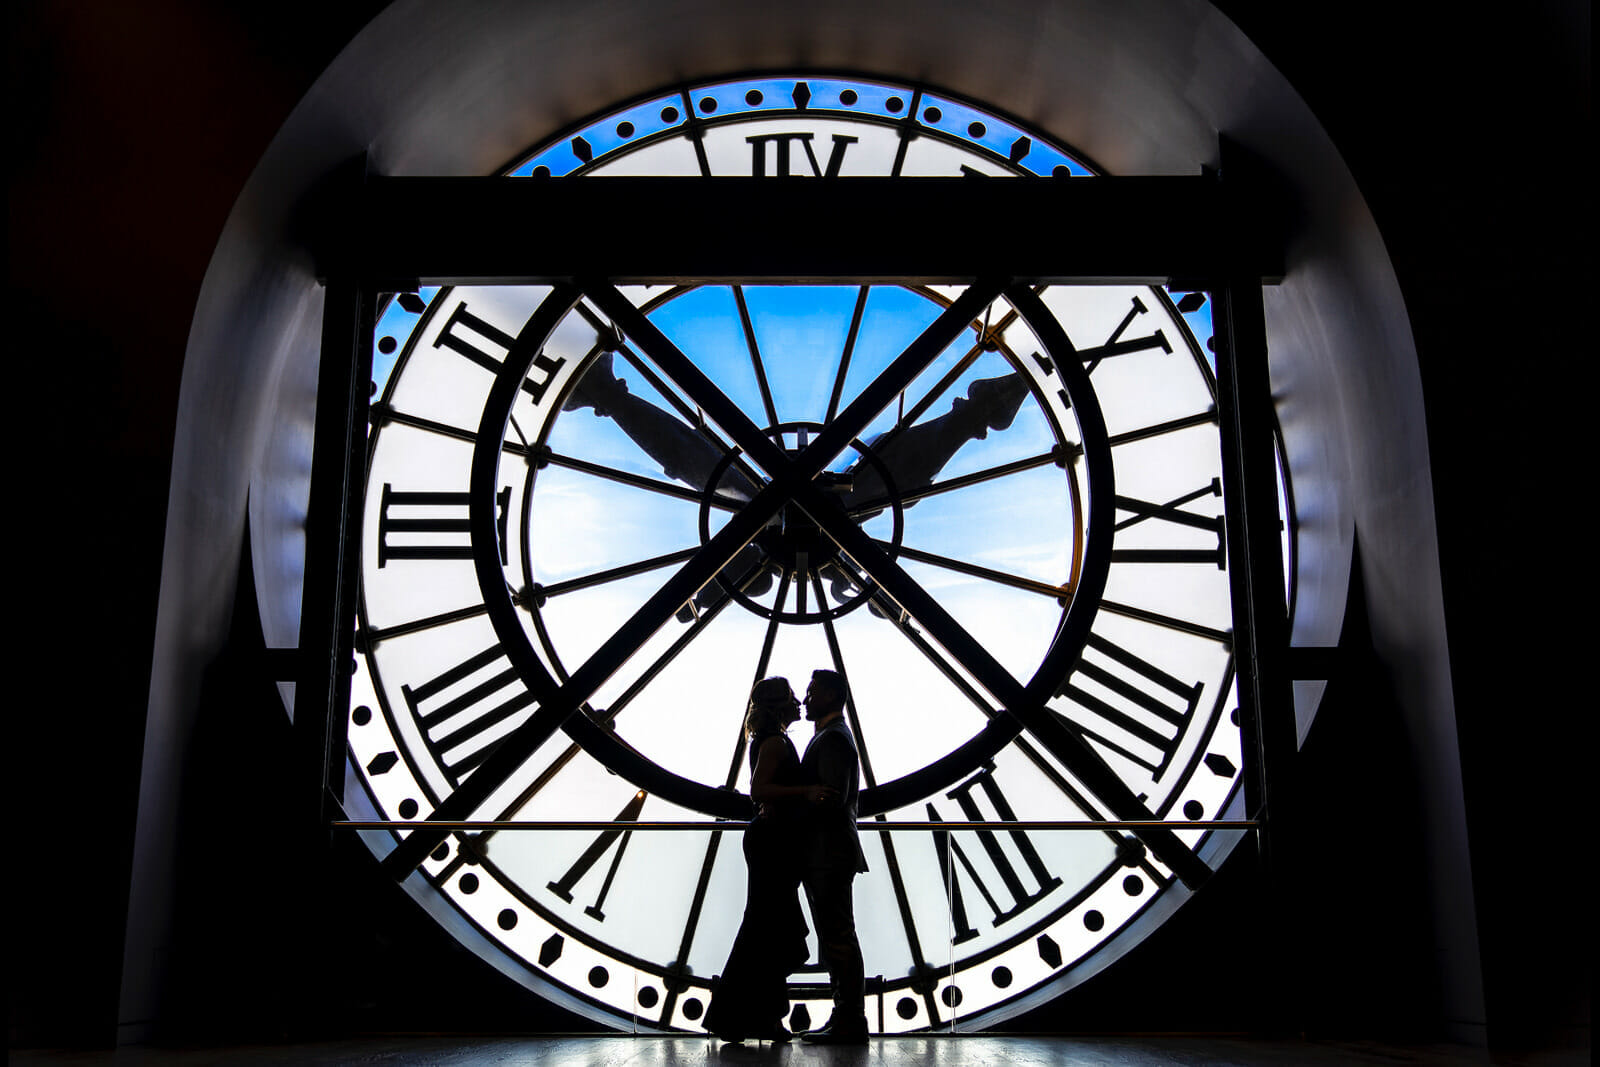 Unique Photoshoot in Paris at the iconic Musée d'Orsay Clock